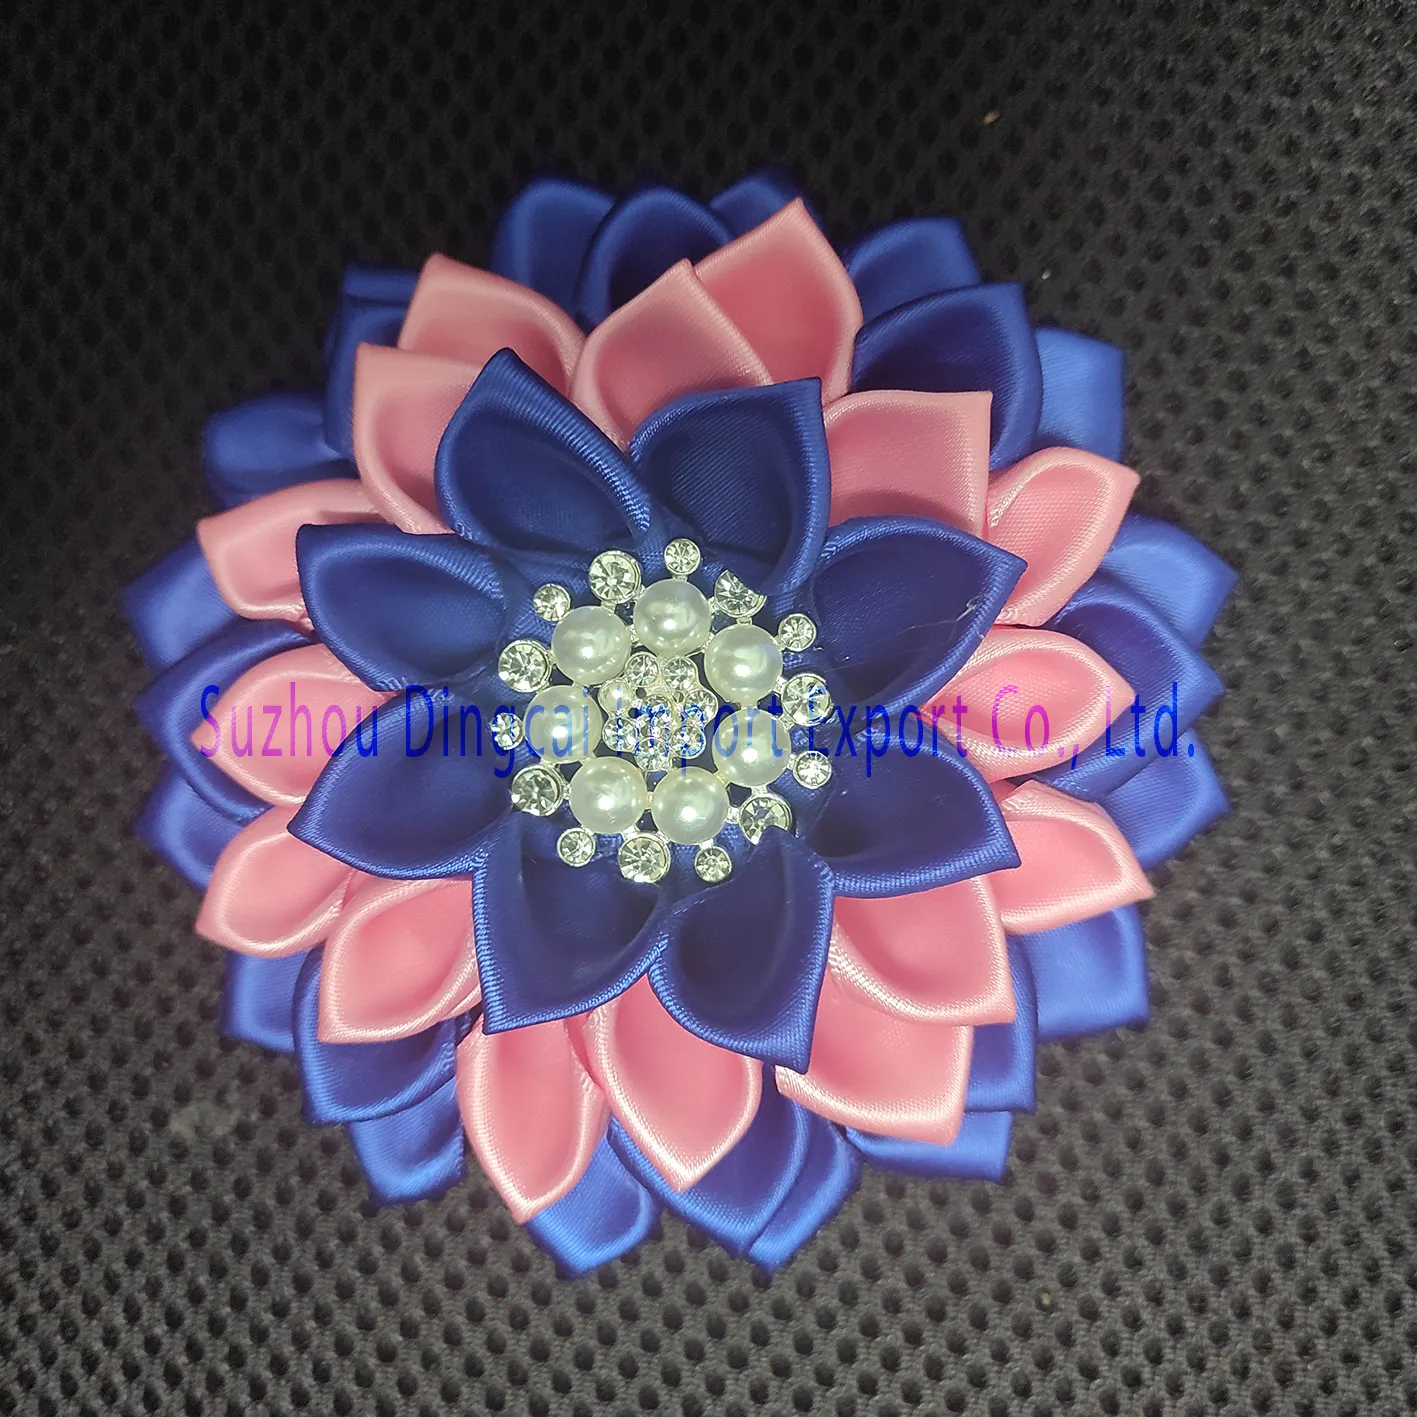 4.5 Inches 48 Petals High Quality Dark Blue and Pink JJ Sorority Greek Letters Corsage